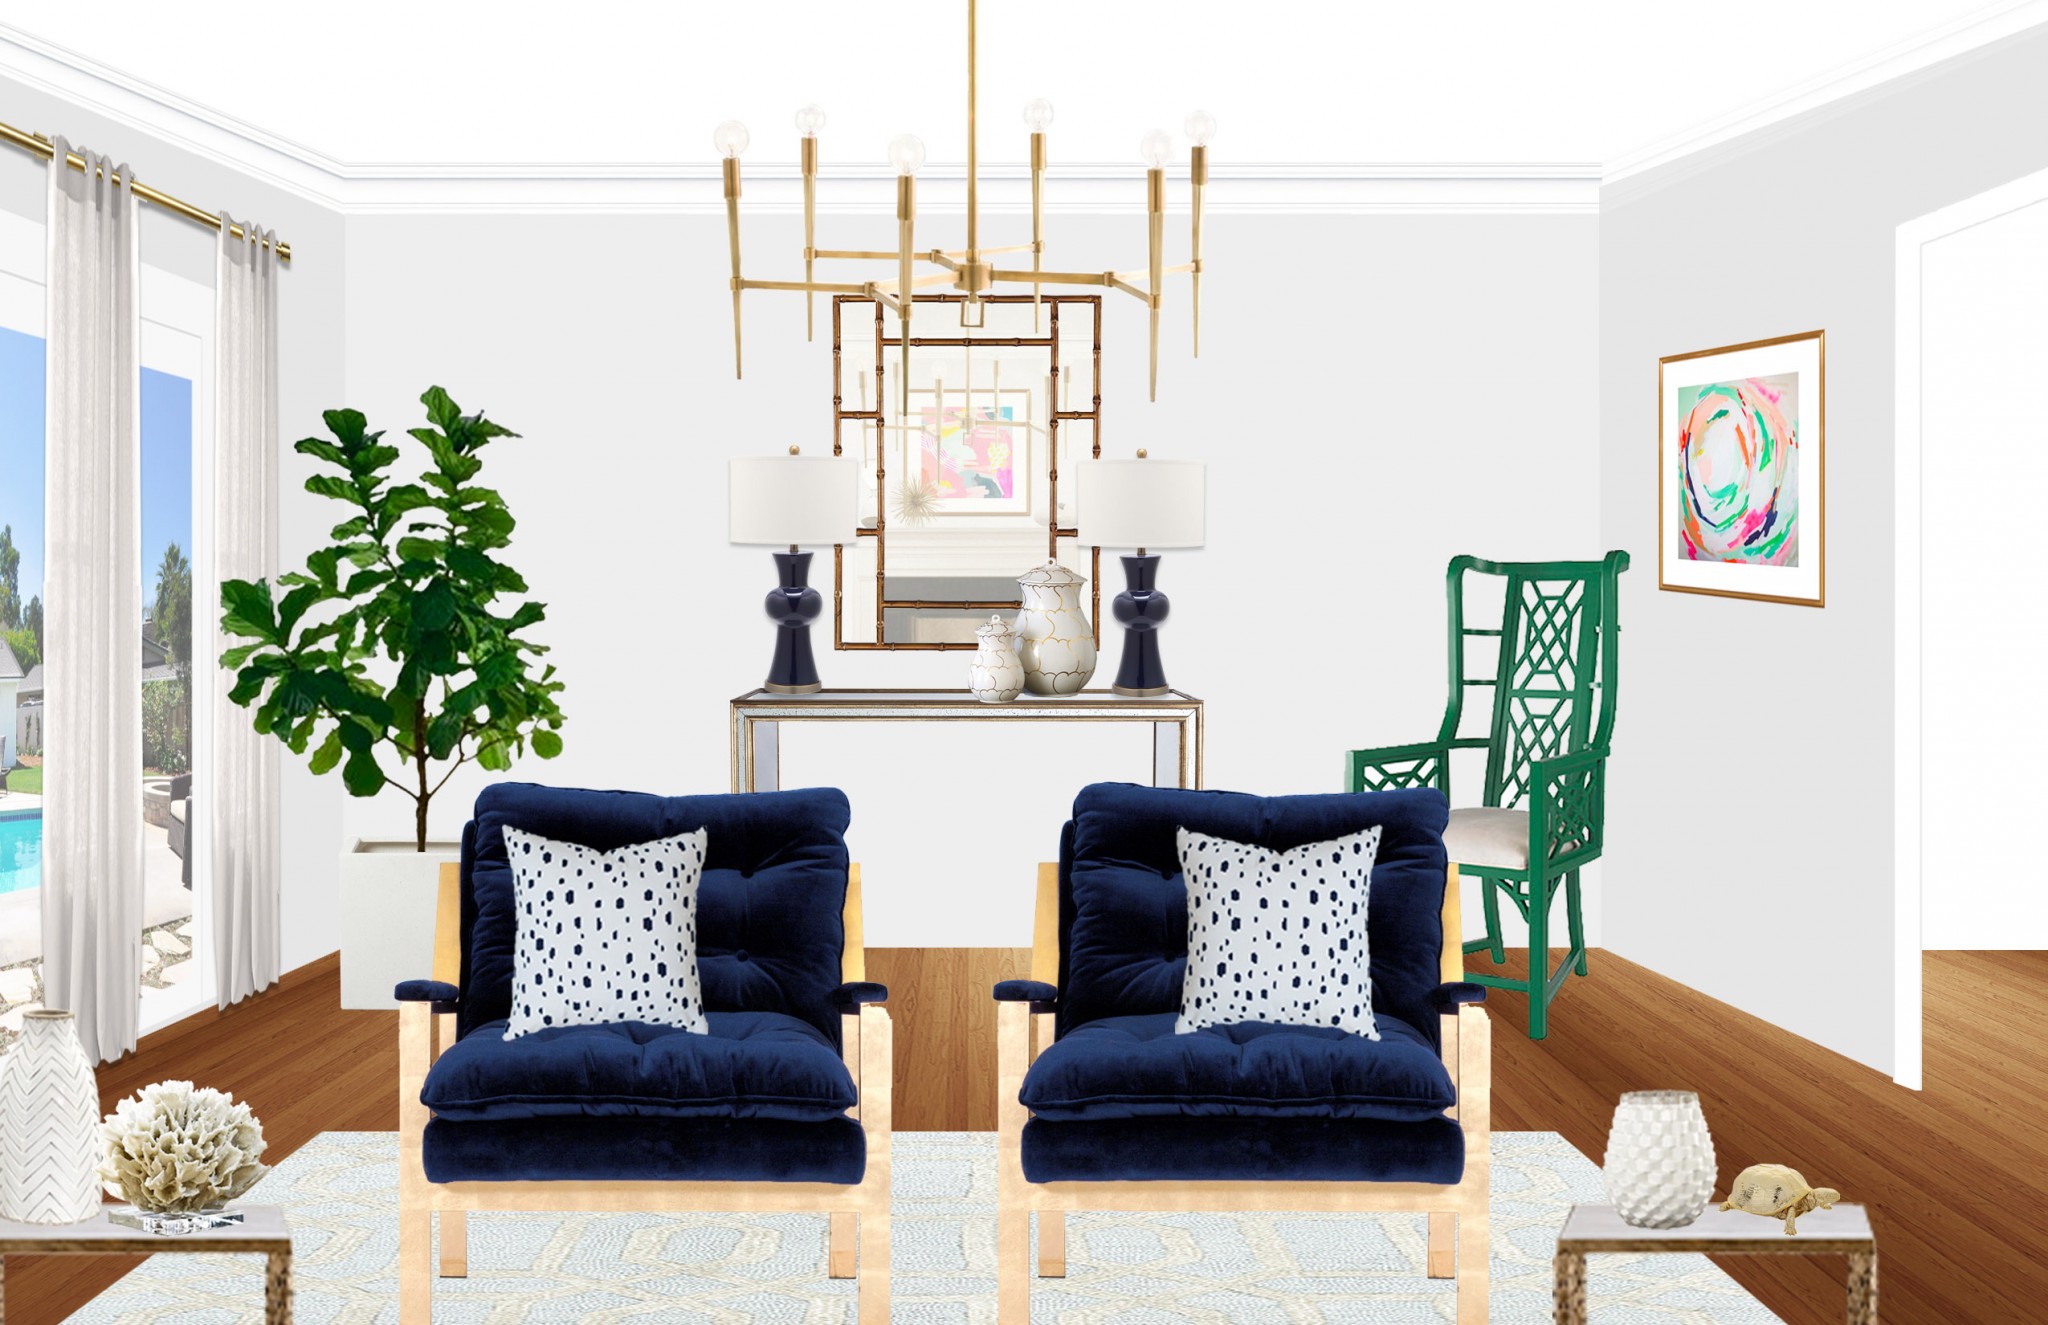 Featured: Luxurious Living in Blue and Green | Havenly Blog | Havenly ...